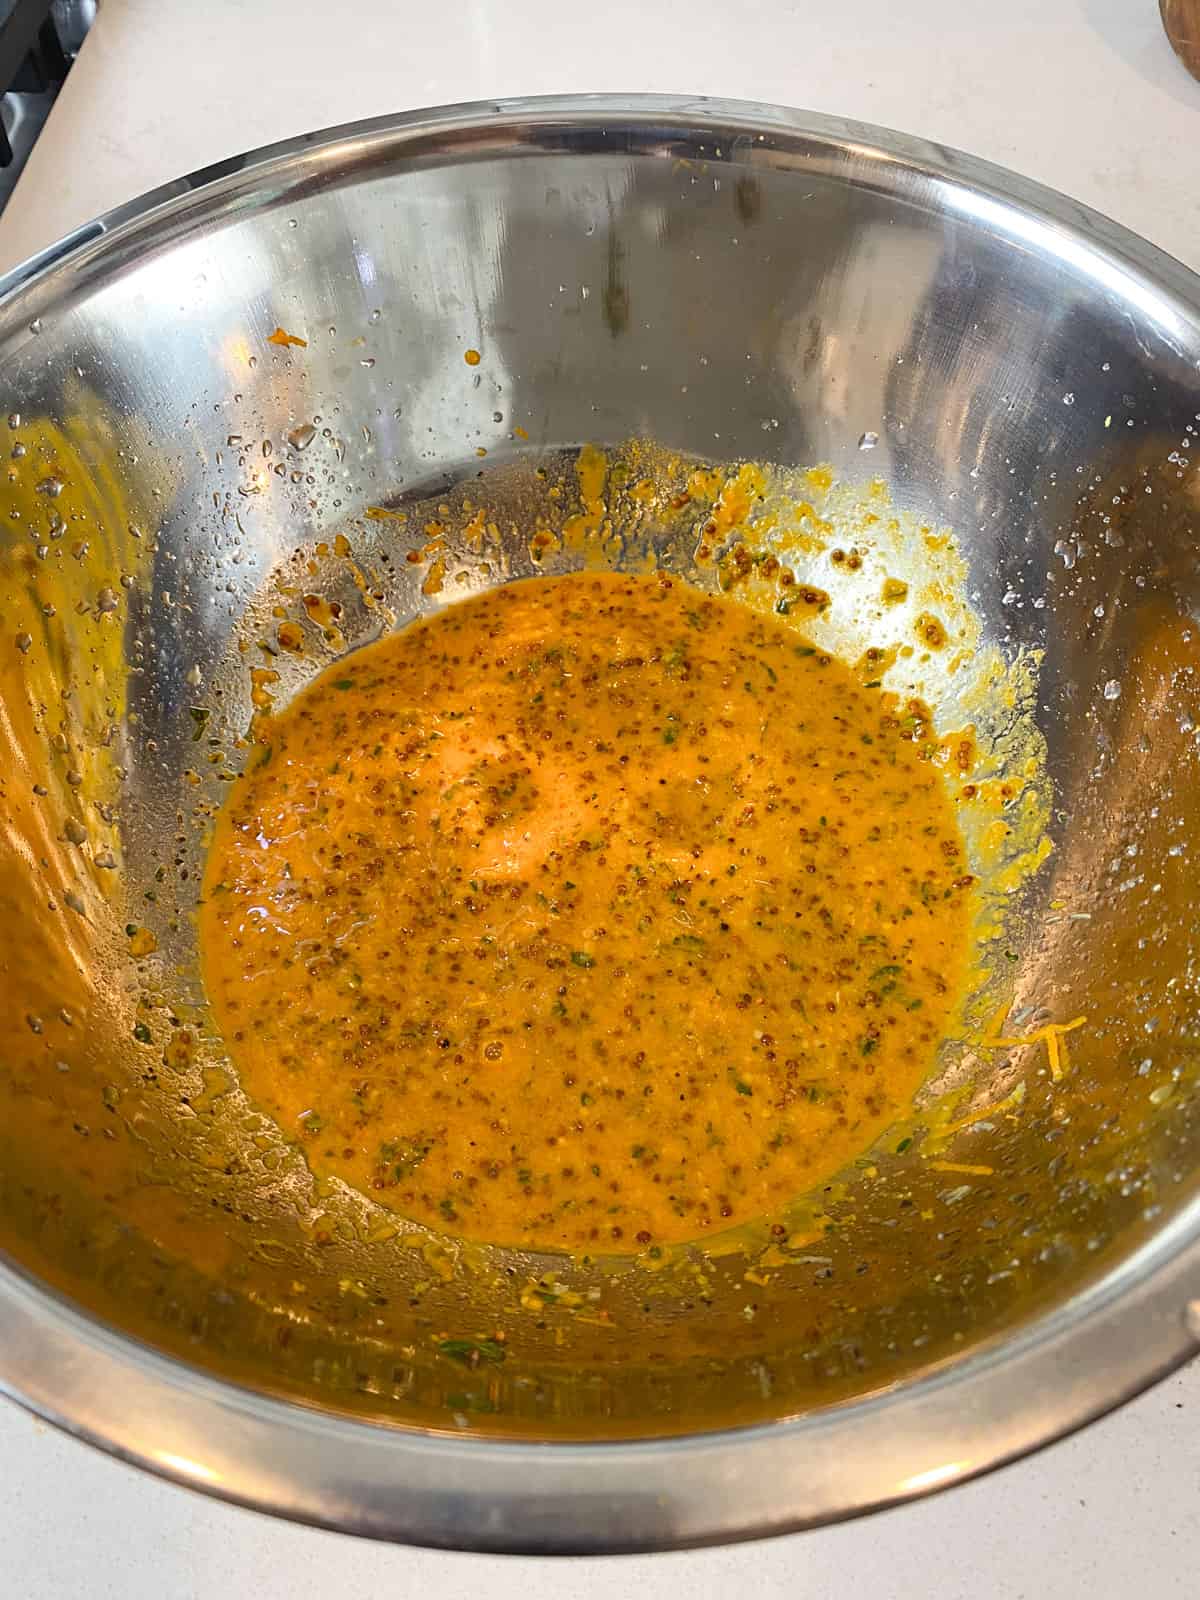 Mix the turmeric and citrus marinade in a bowl until well combined.